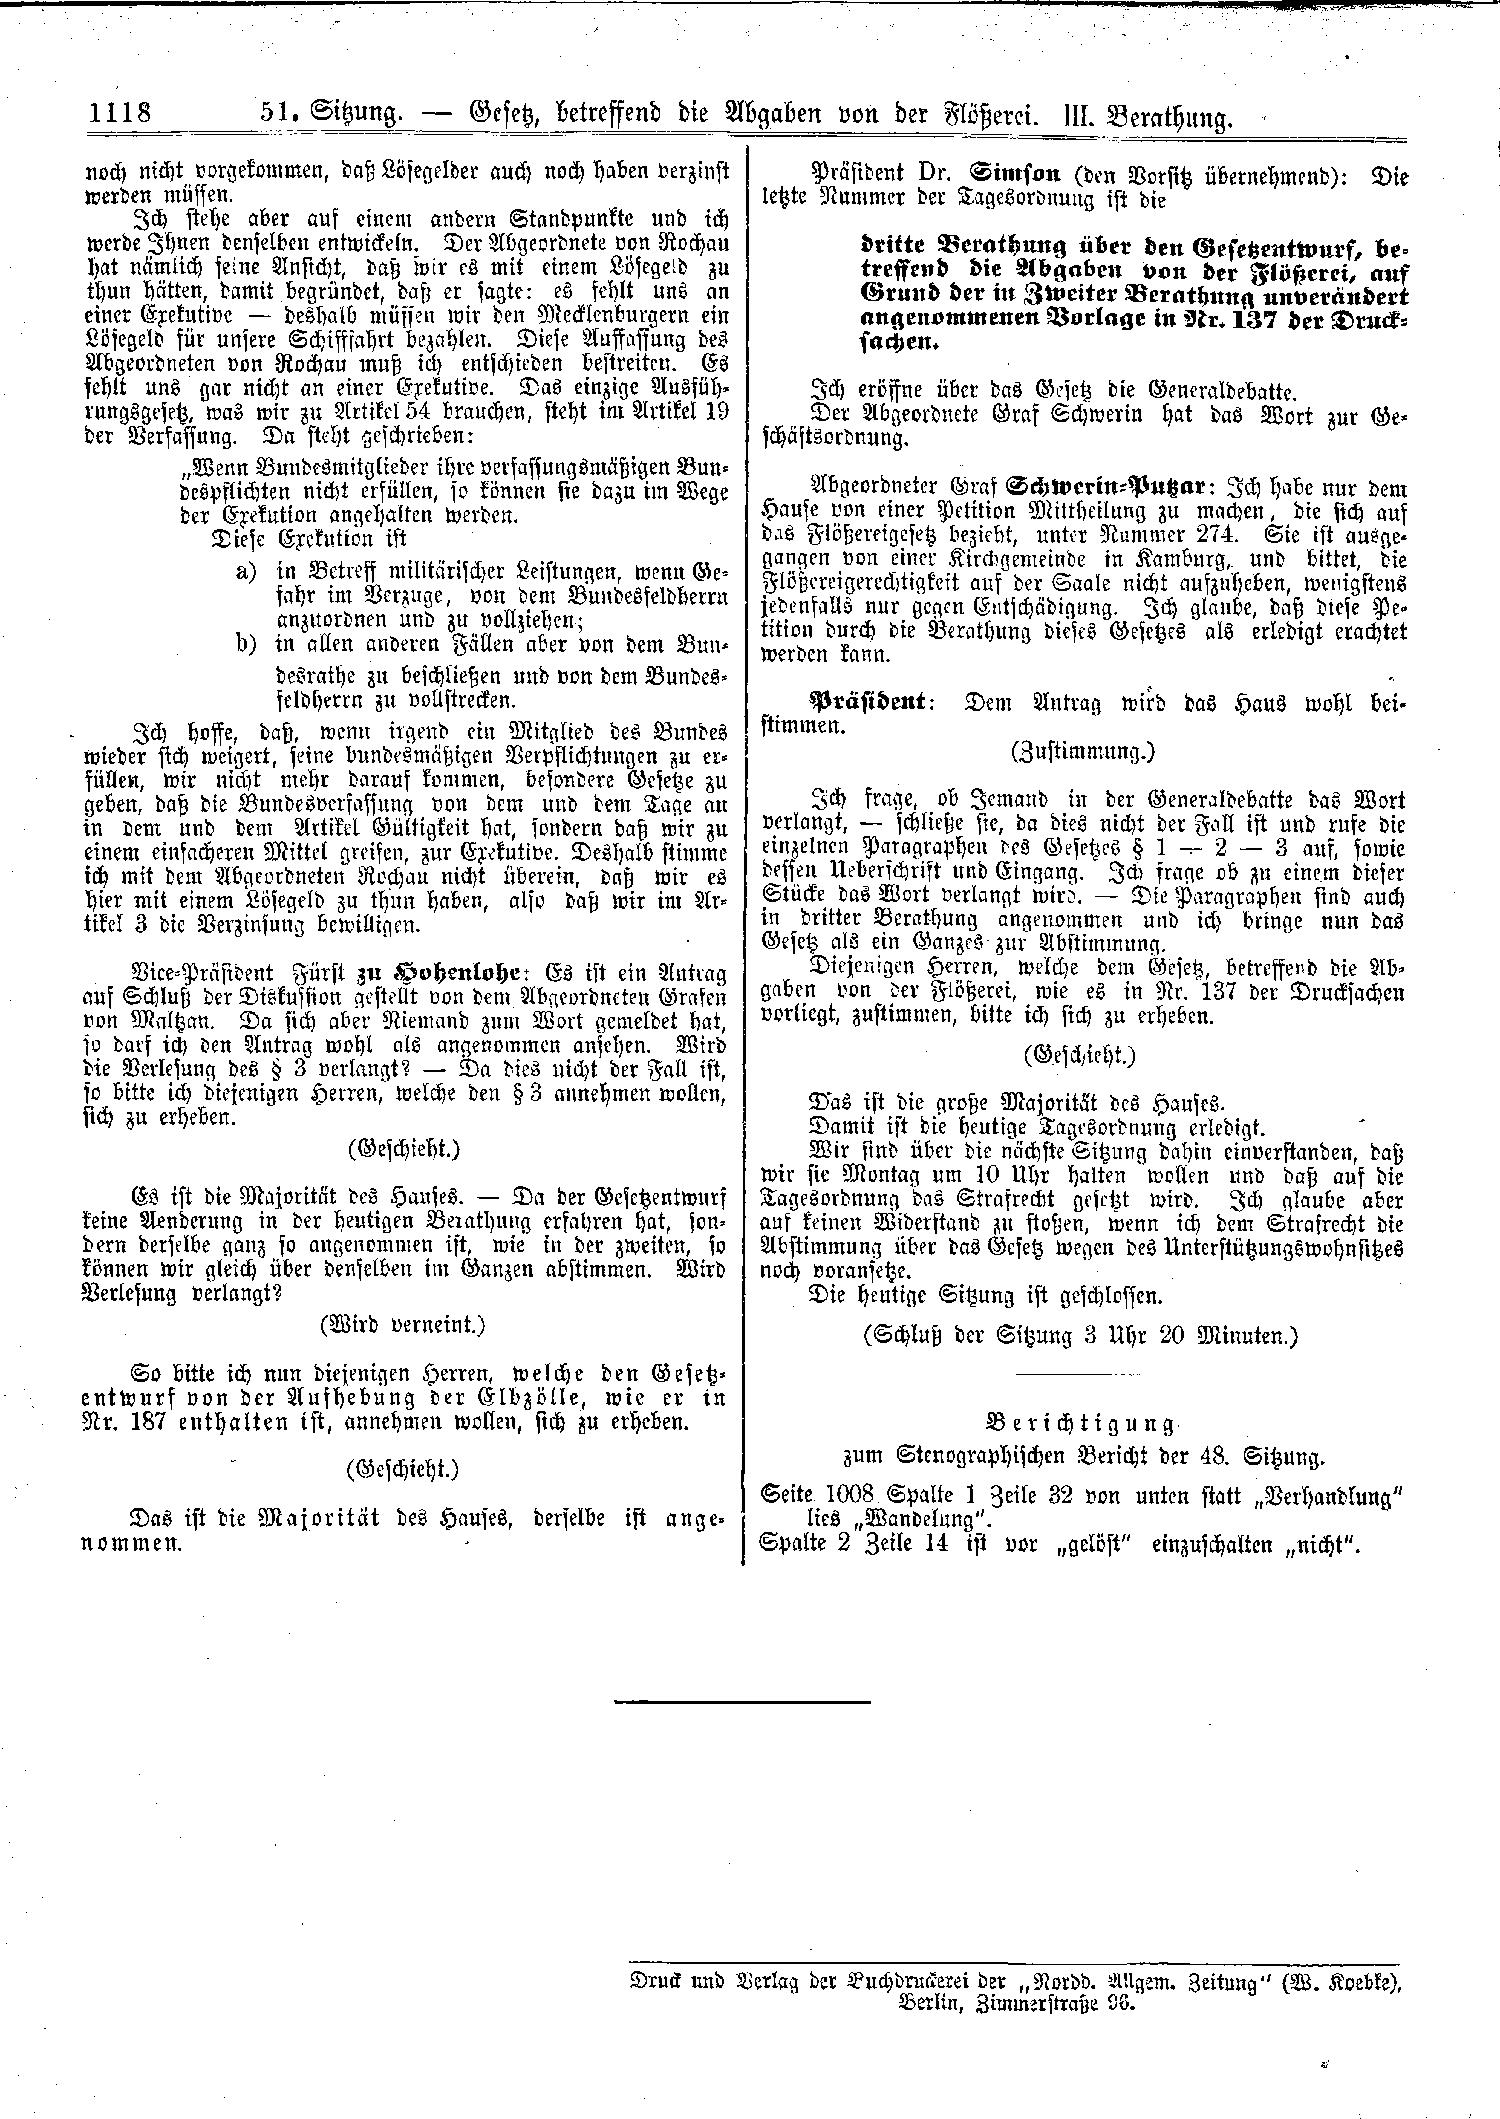 Scan of page 1118